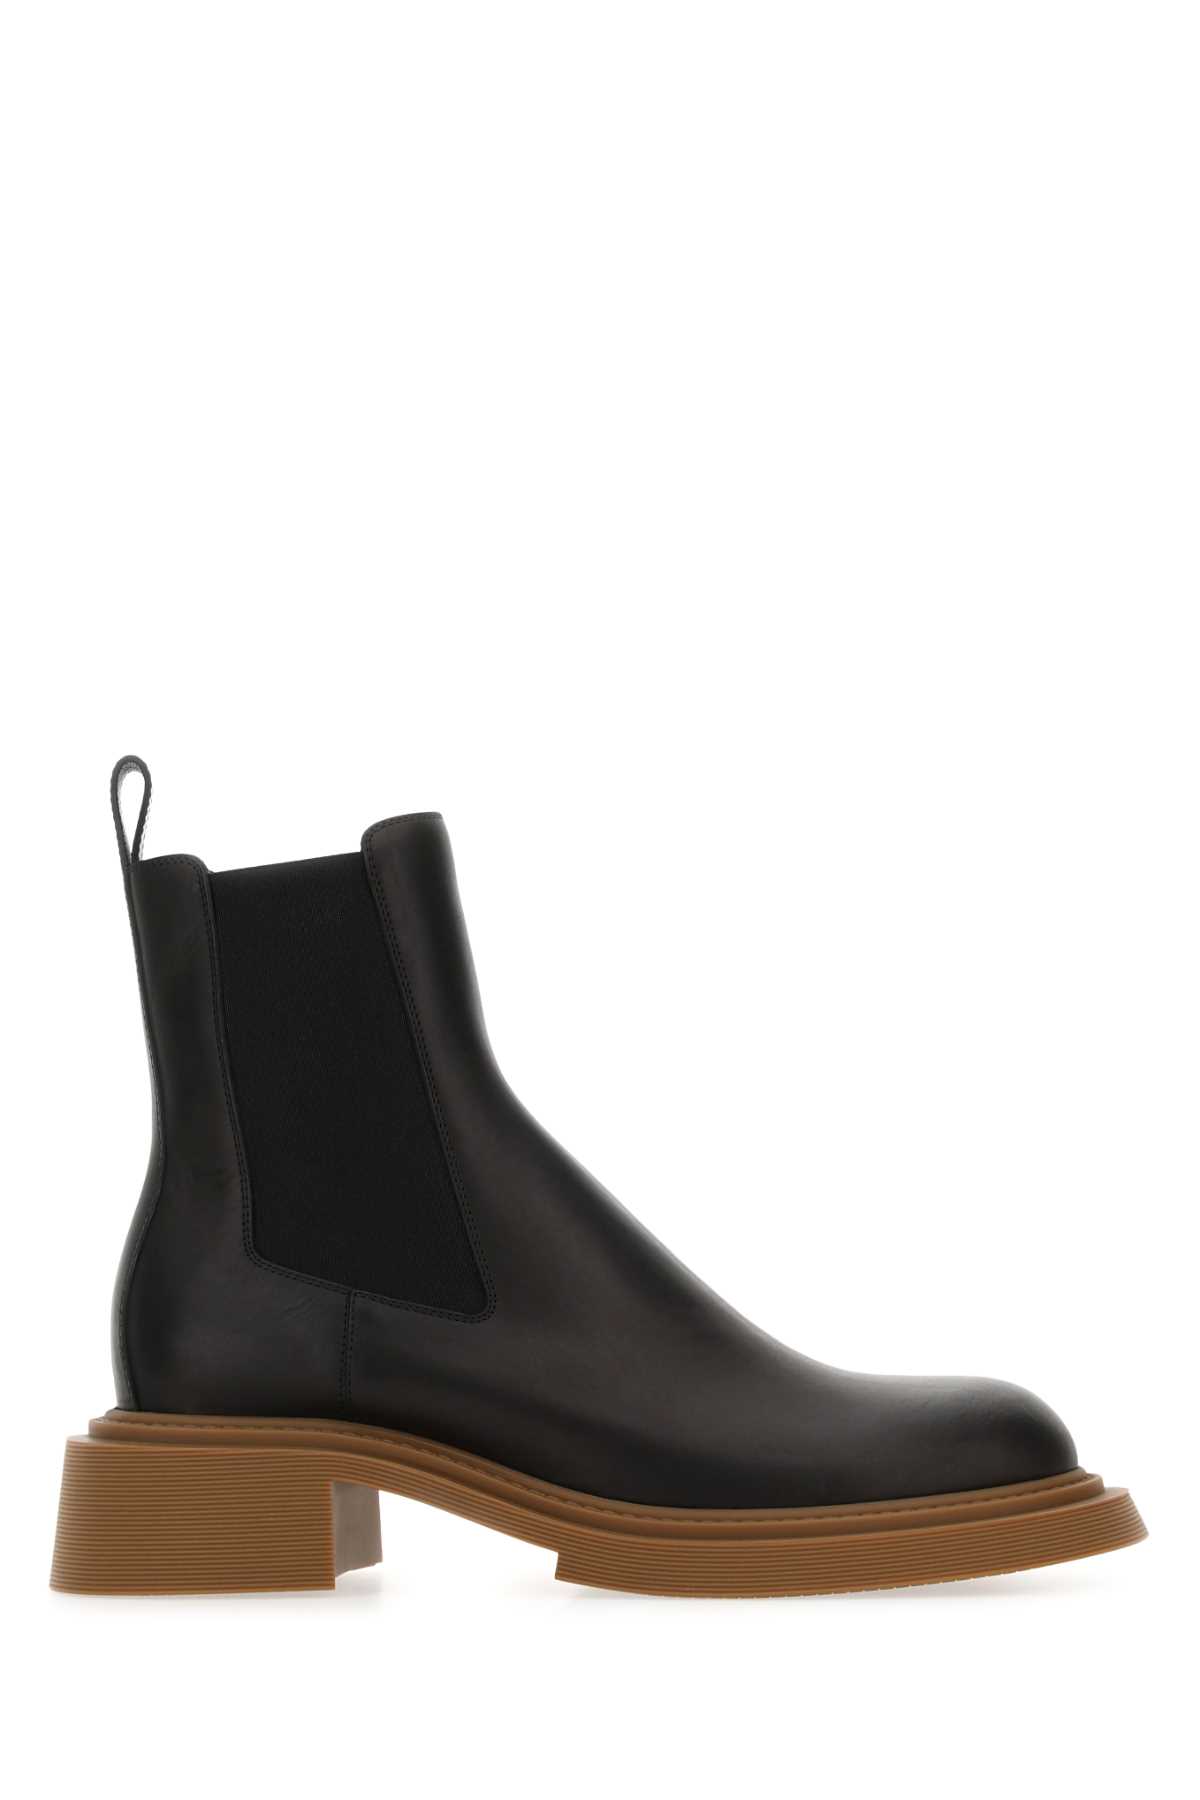 Loewe Black Leather Chelsea Ankle Boots